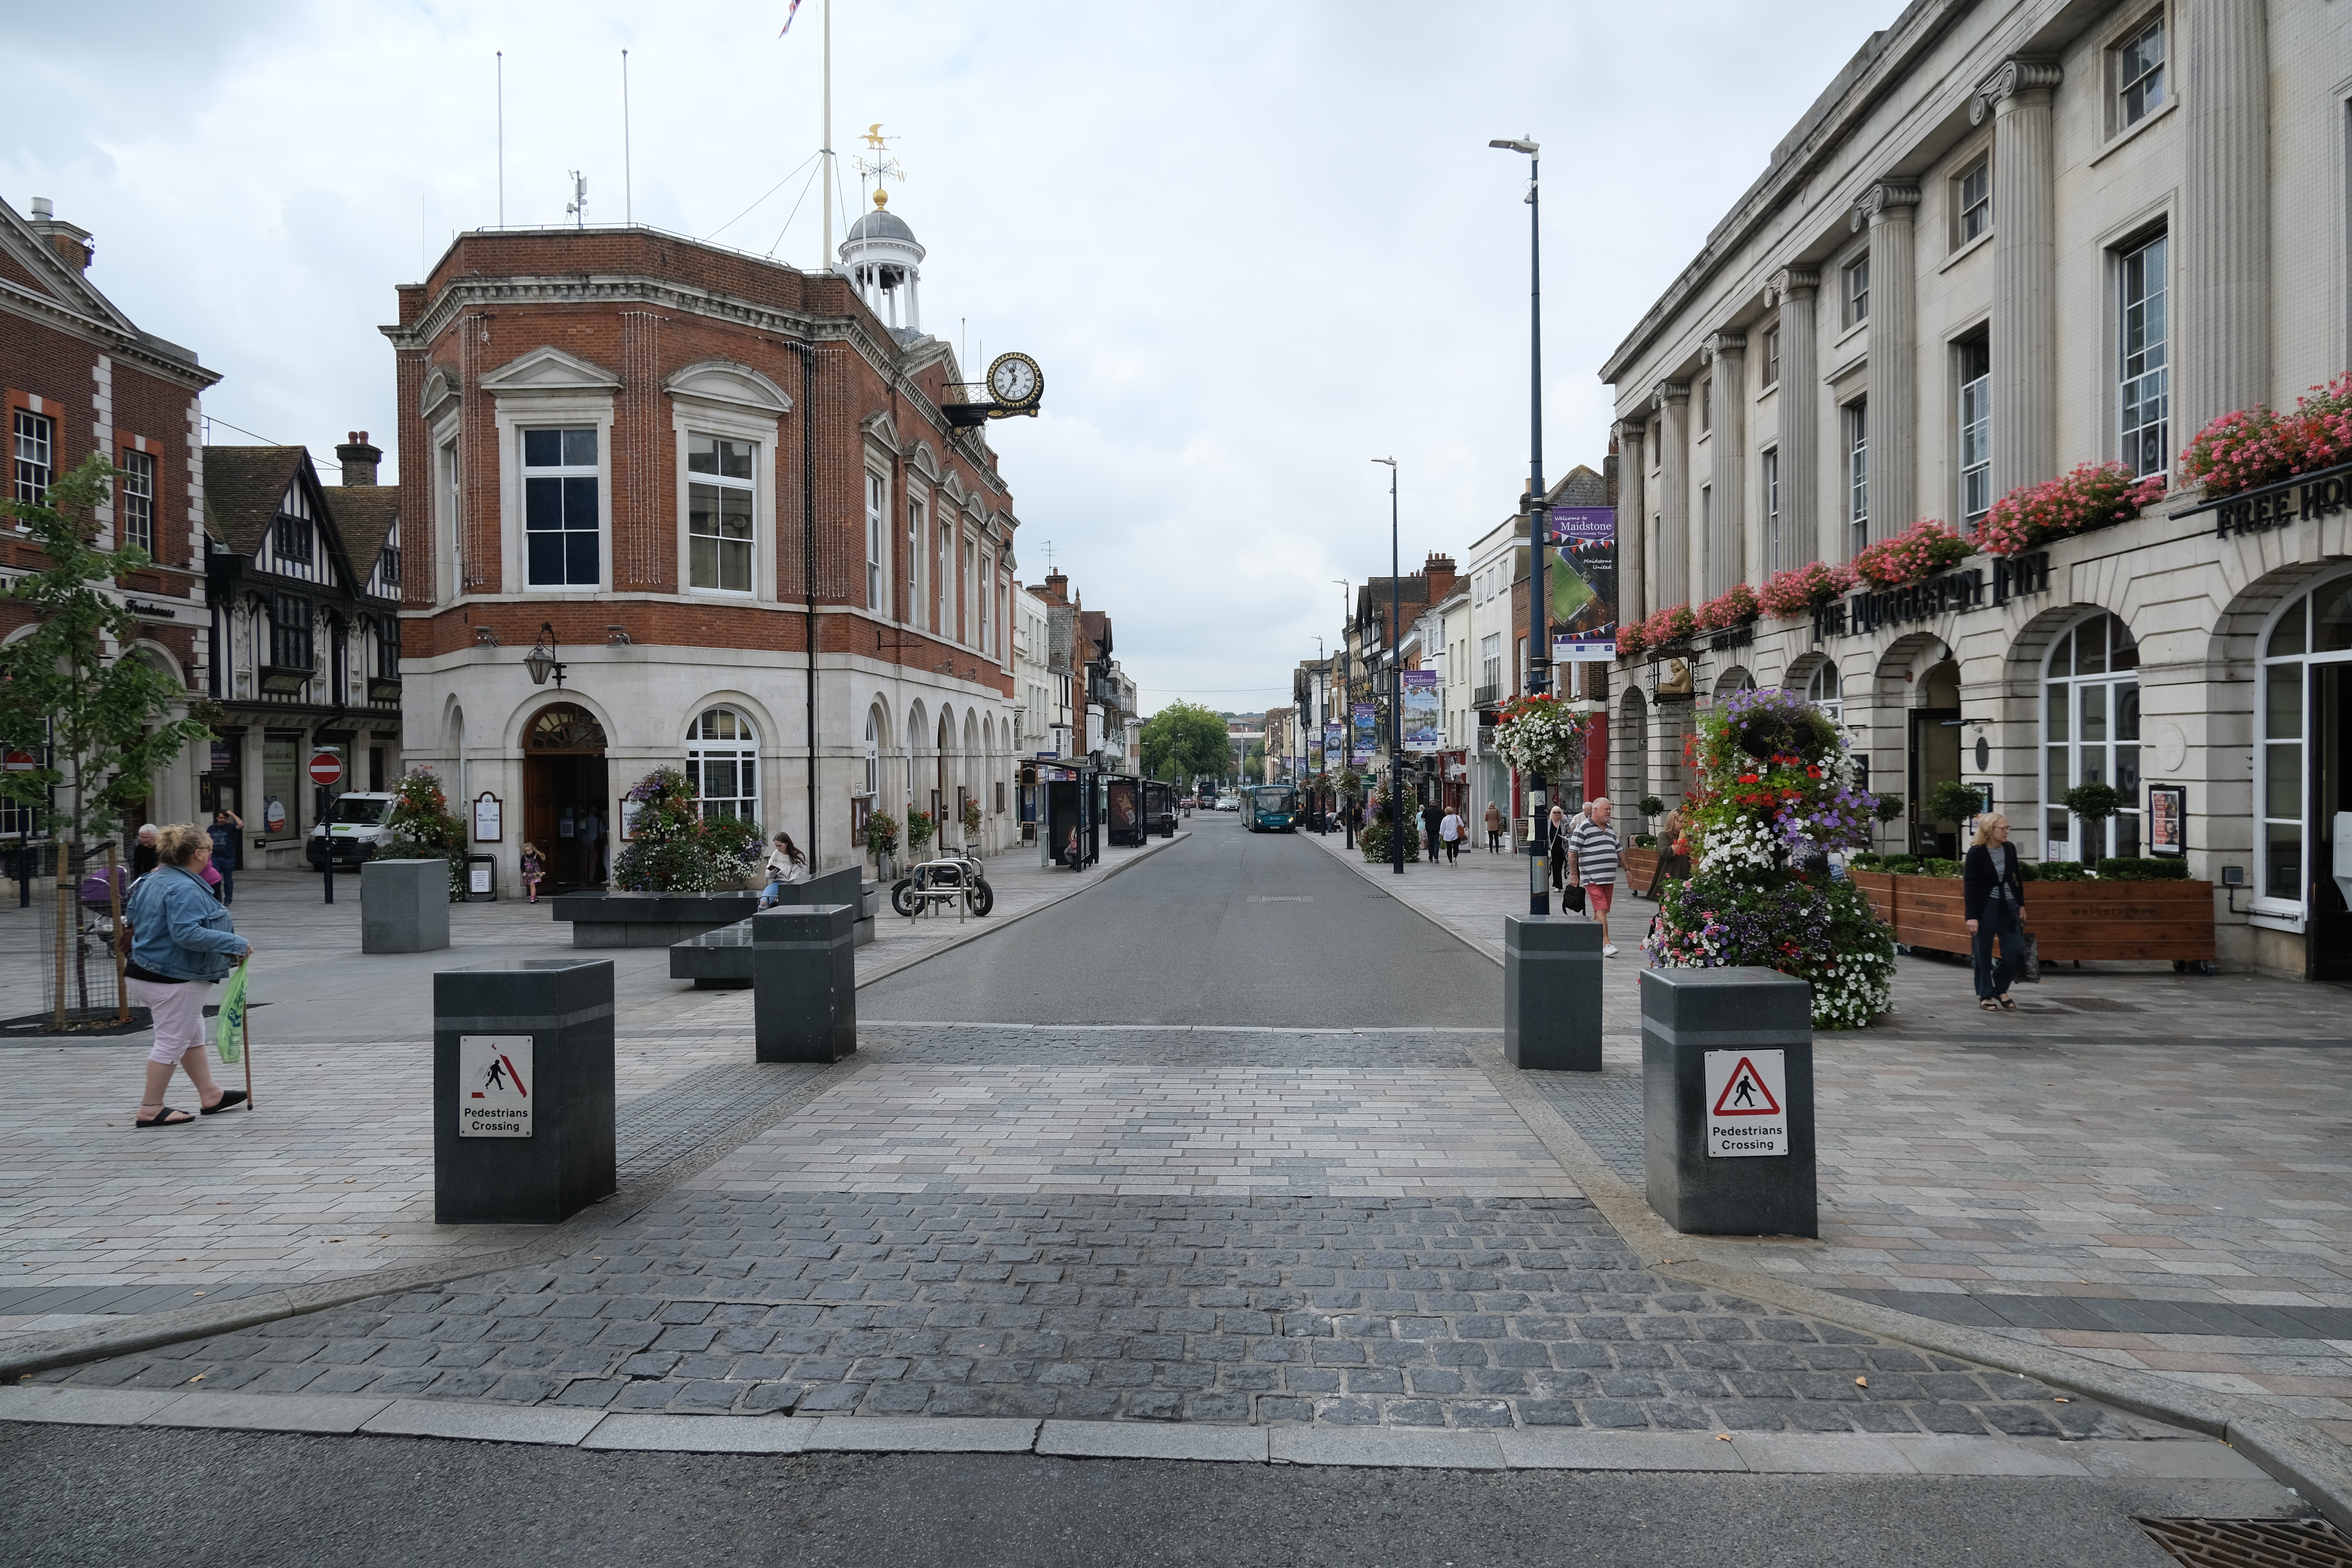 Have your say on measures to reduce antisocial behaviour in the town centre image